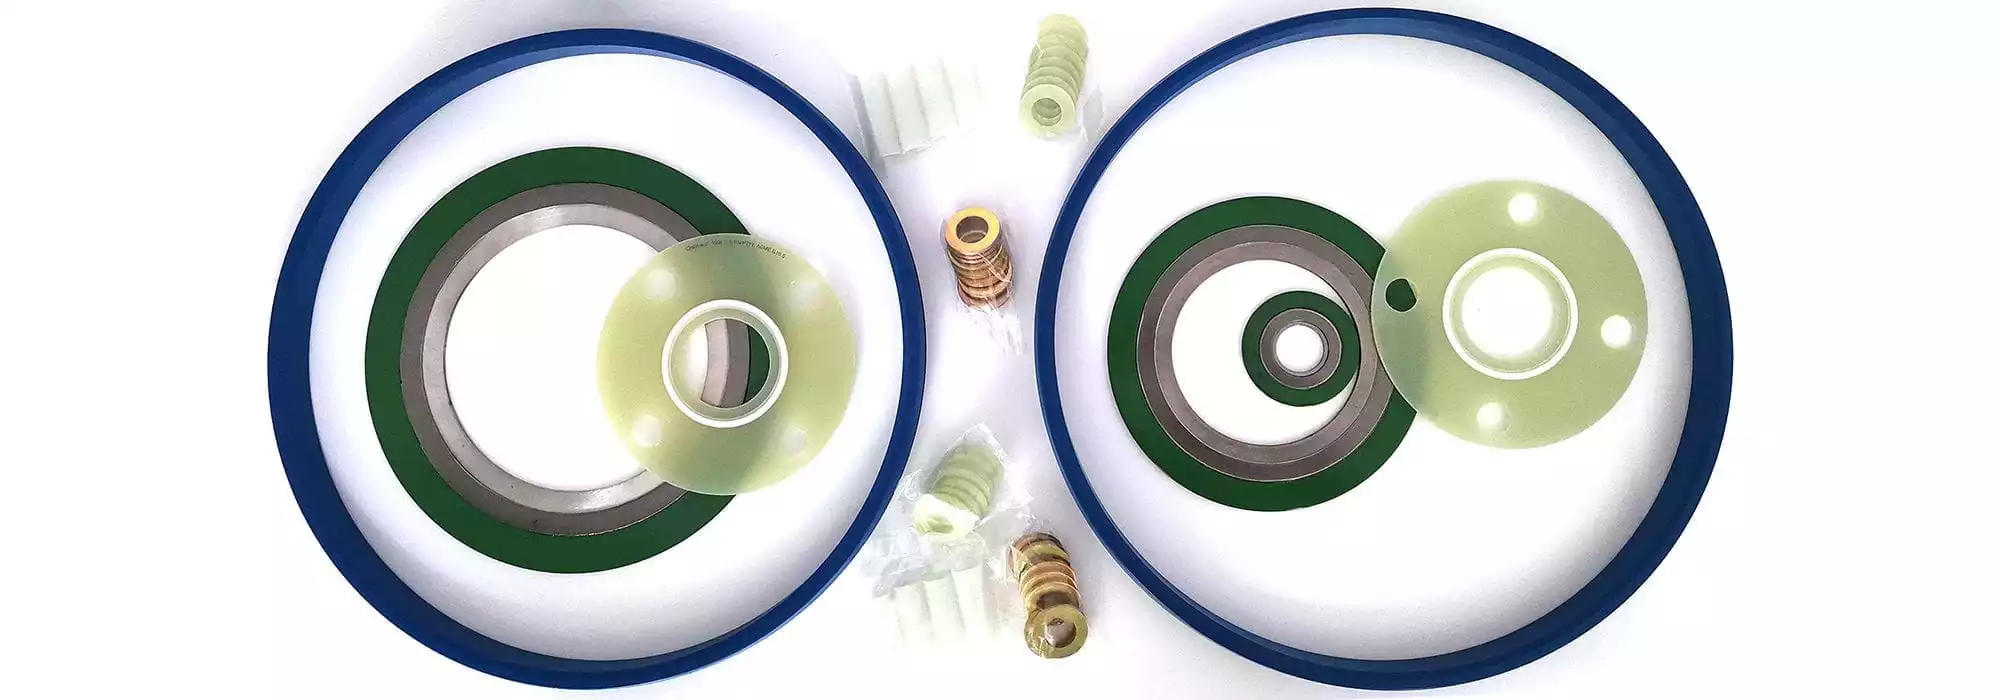 Diverse Selection of Gaskets to Suit Your Needs